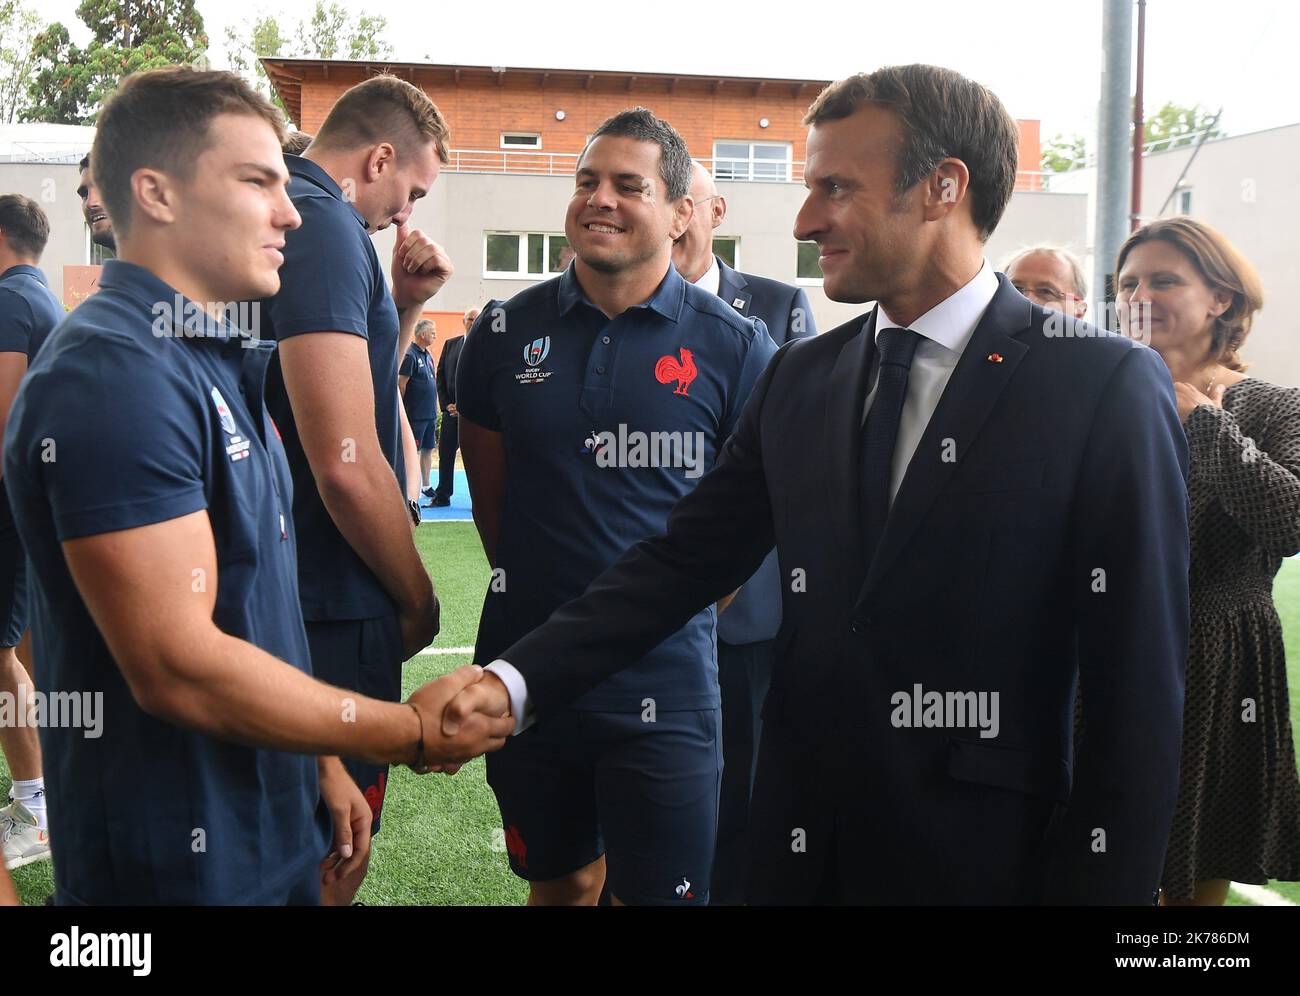 France's President Emmanuel Macron at the National Rugby Center in Marcoussis, south of Paris, on September 5, 2019. The French rugby team is preparing for the upcoming 2019 World Cup in Japan. President Macron visited ahead of the upcoming Rugby World Cup, at the National Rugby Center in Marcoussis.  Stock Photo